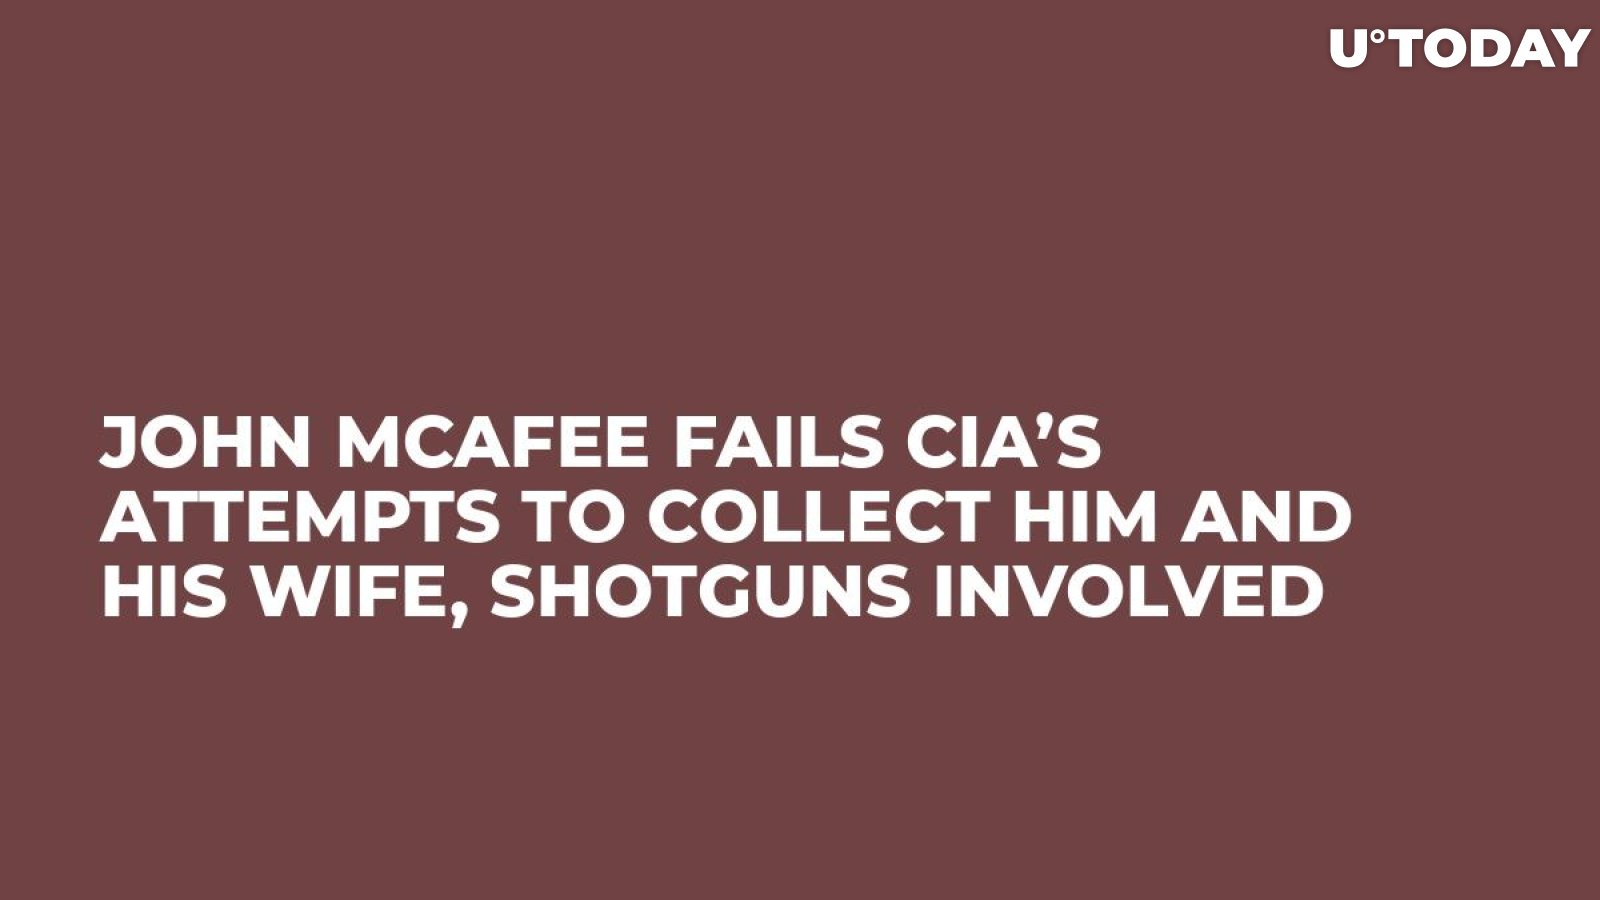 John McAfee Fails CIA’s Attempts to Collect Him and His Wife, Shotguns Involved